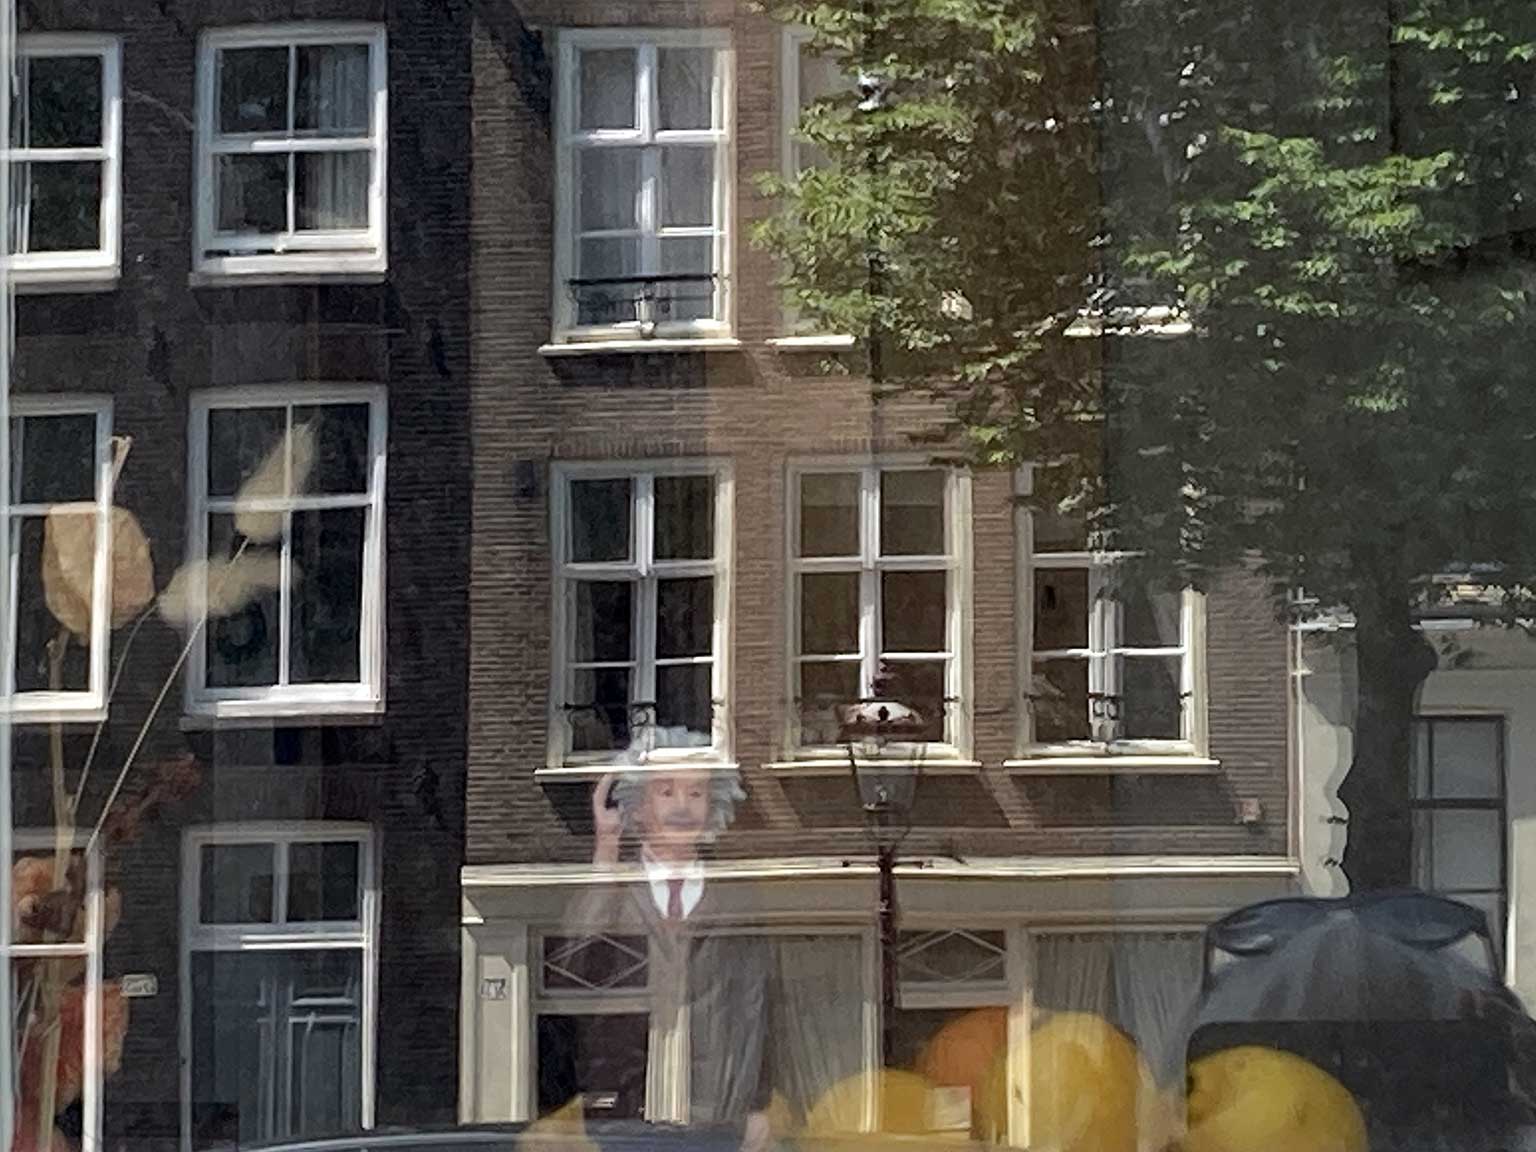 Albert Einstein puppet in window on the Prinsengracht, Amsterdam, with reflection of houses